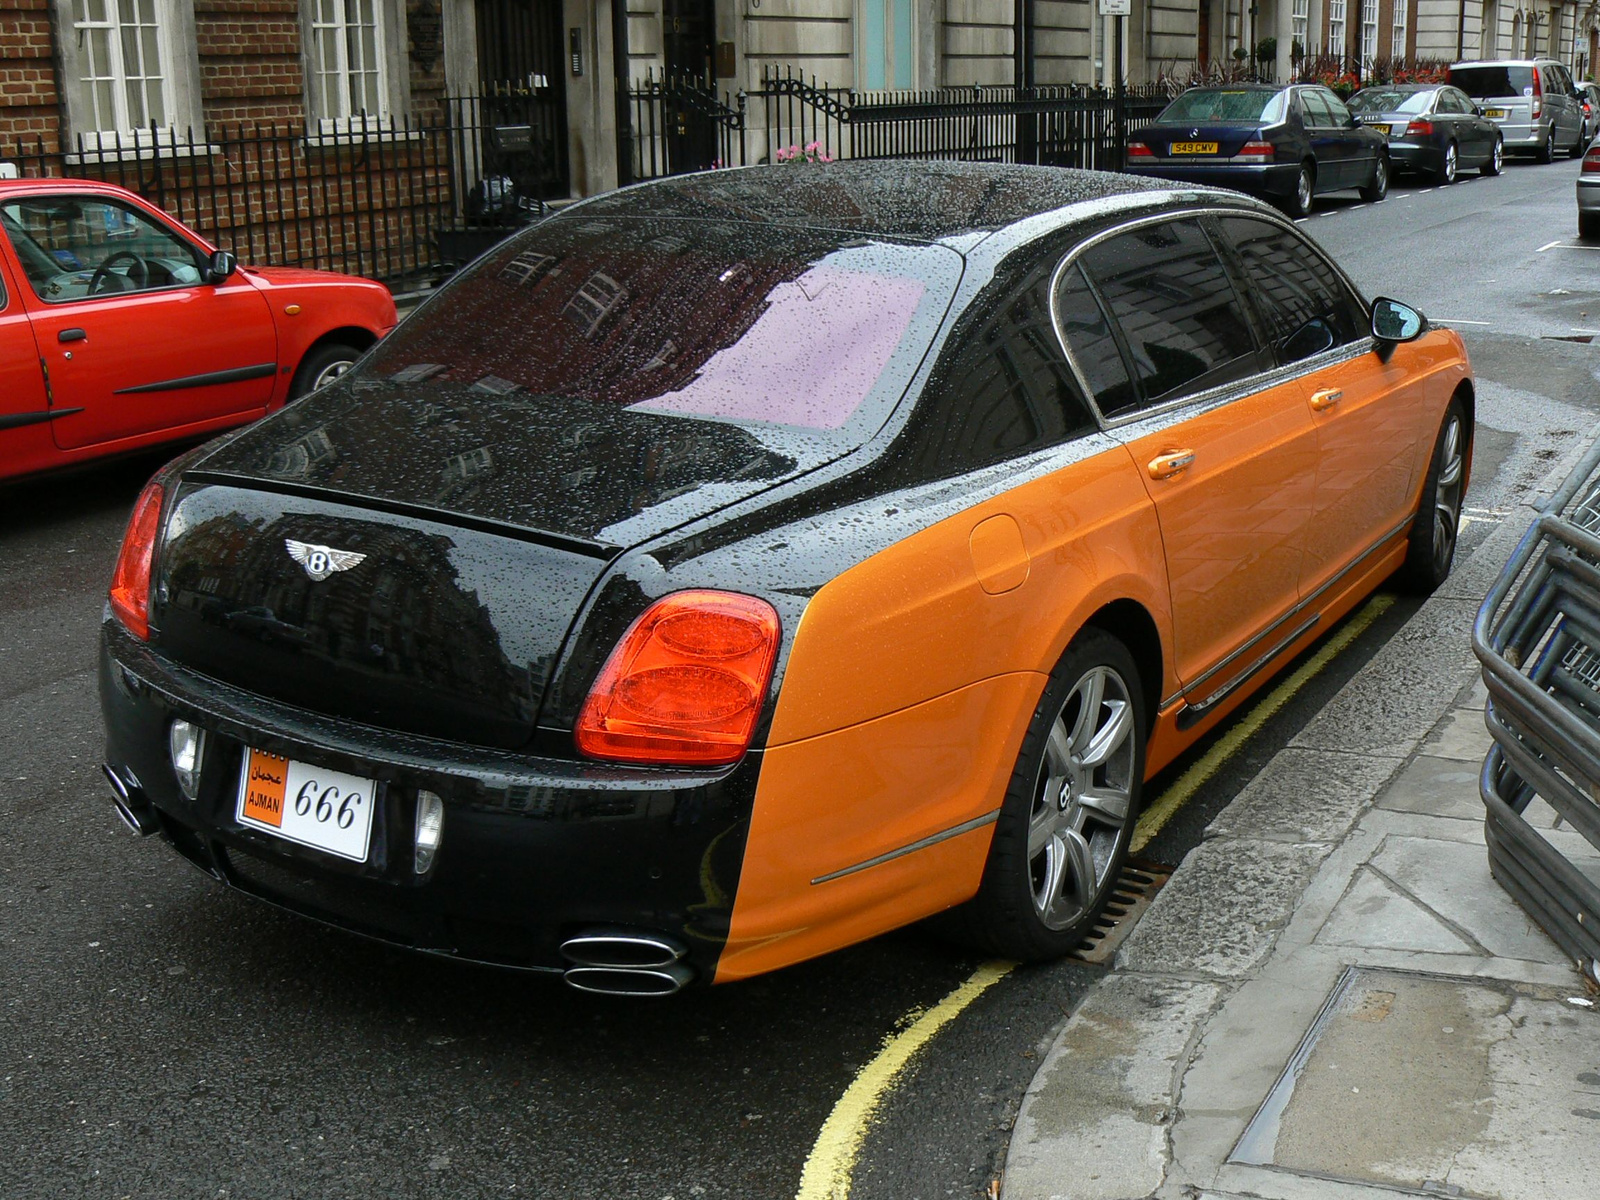 (5) Bentley Continental Flying Spur Mansory